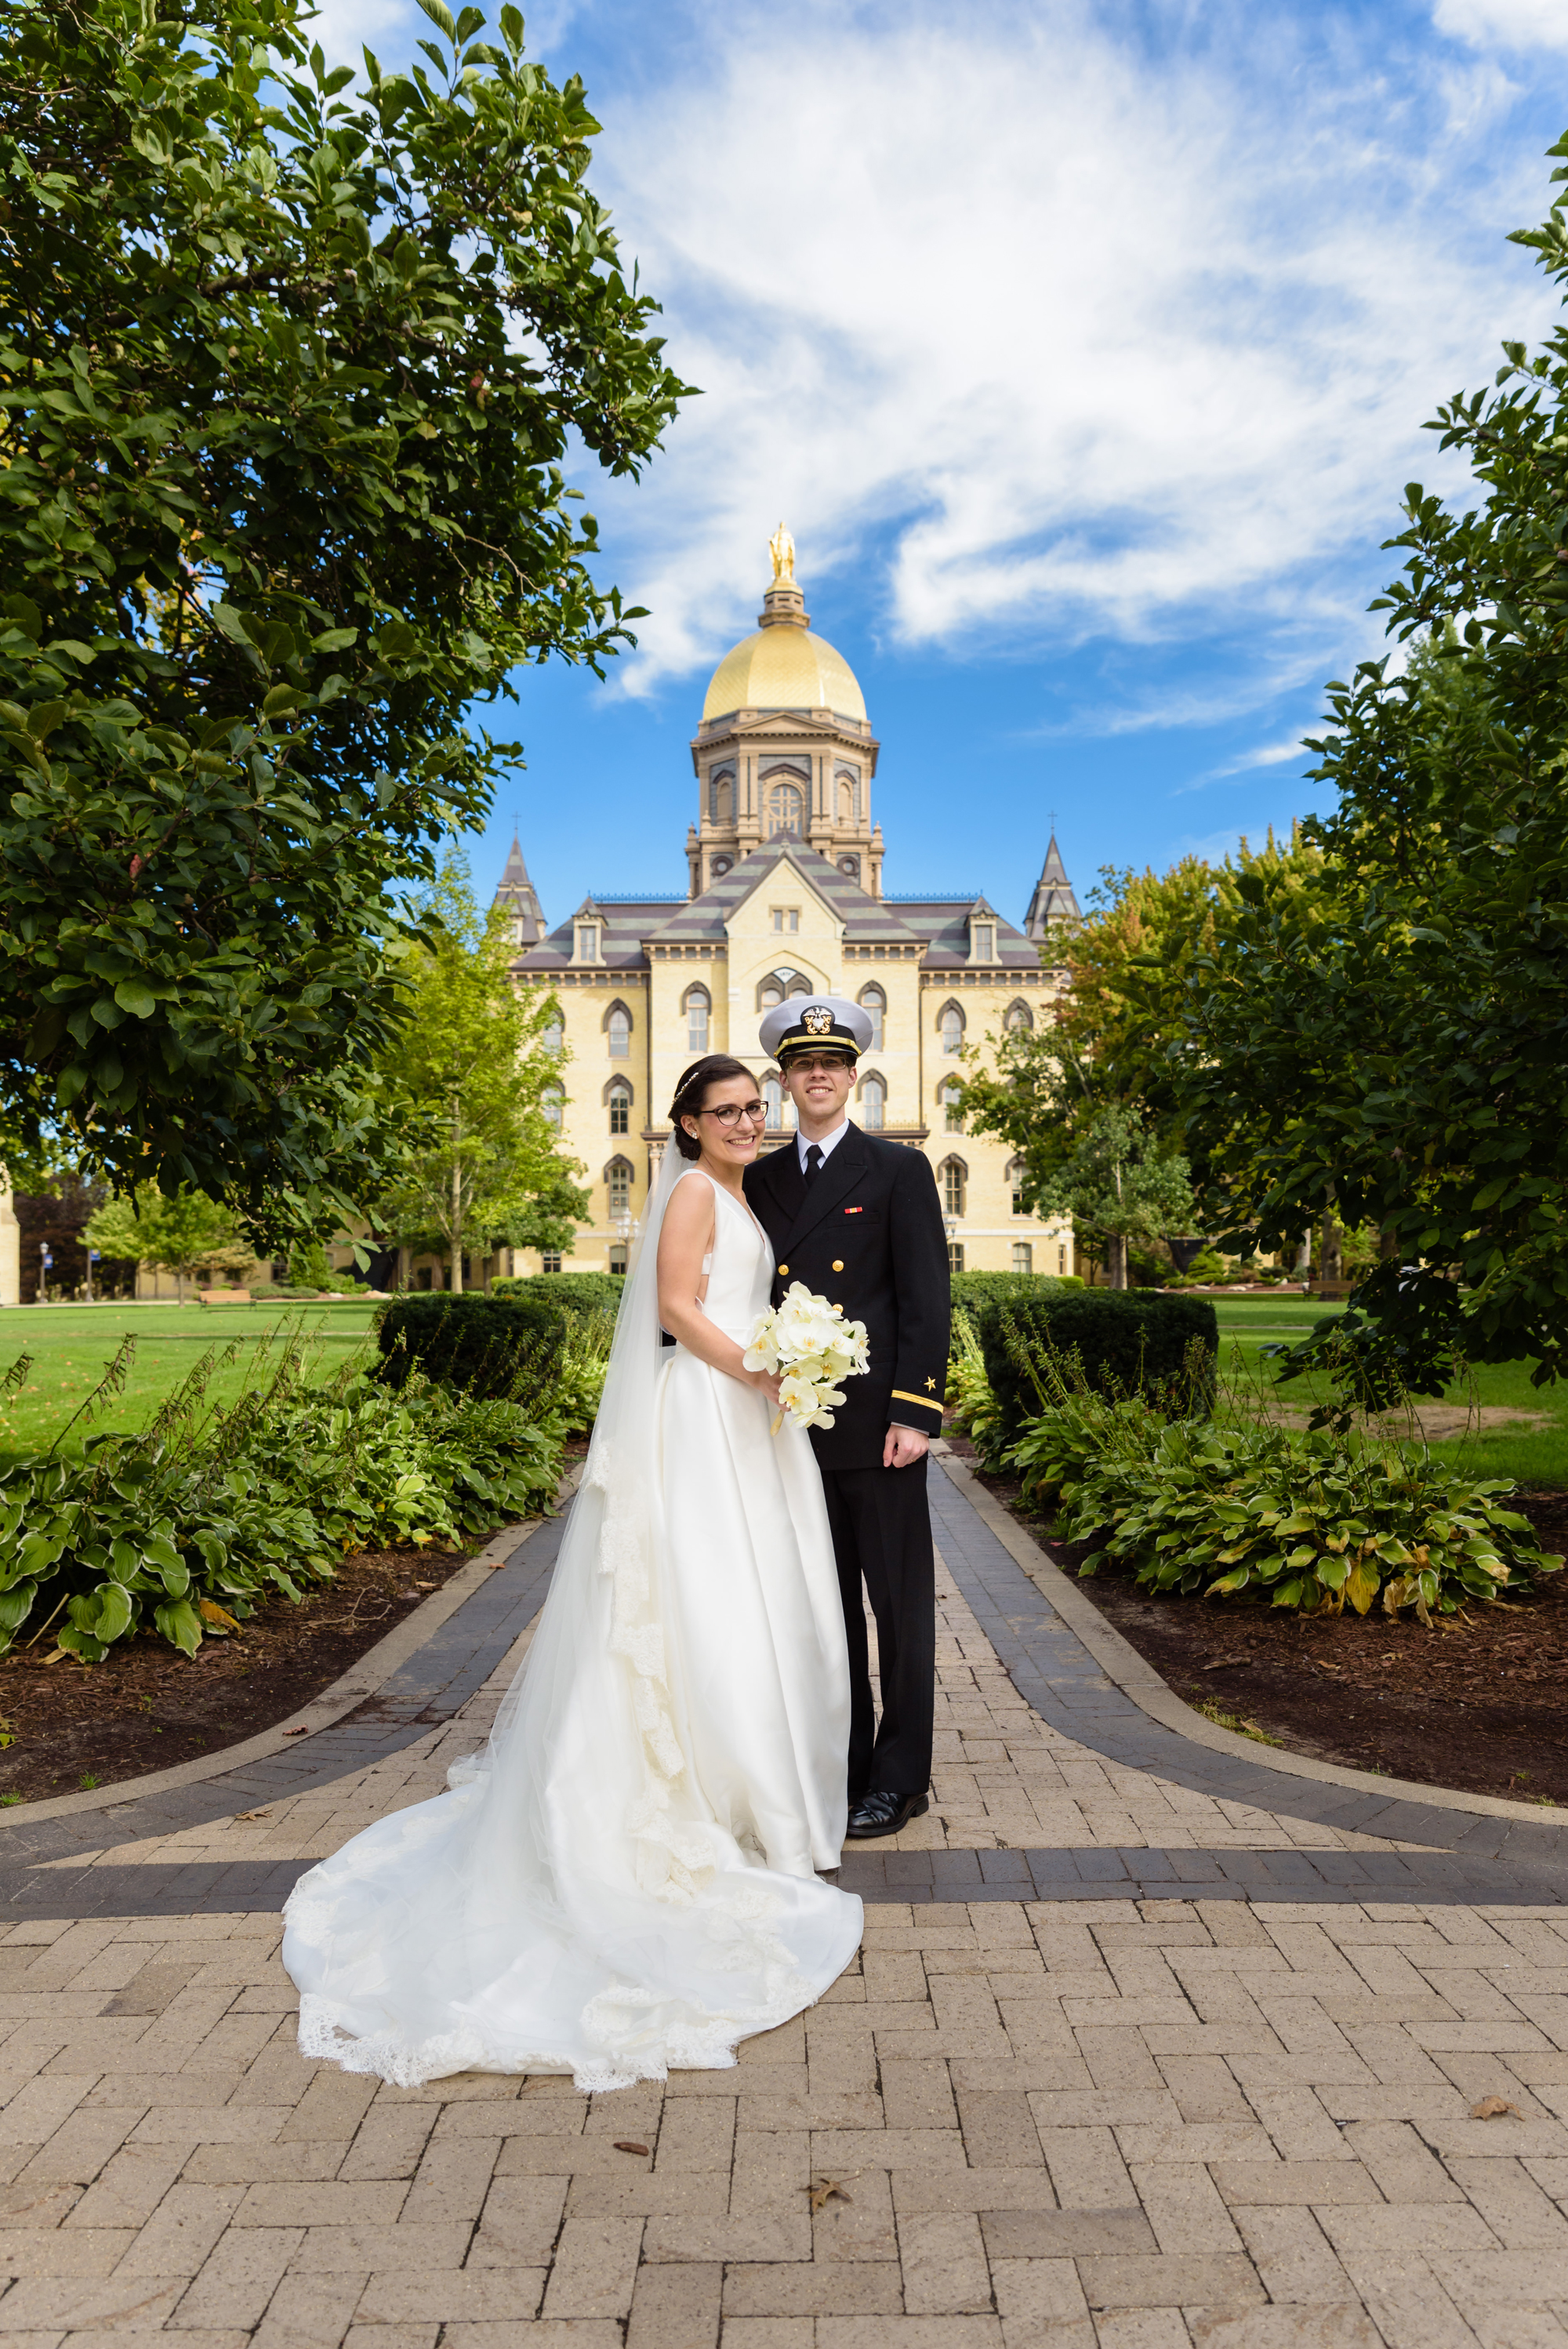 Bride & Groom in front of the Golden Dome on God Quad after their wedding ceremony at the Basilica of the Sacred Heart on the campus of the University of Notre Dame